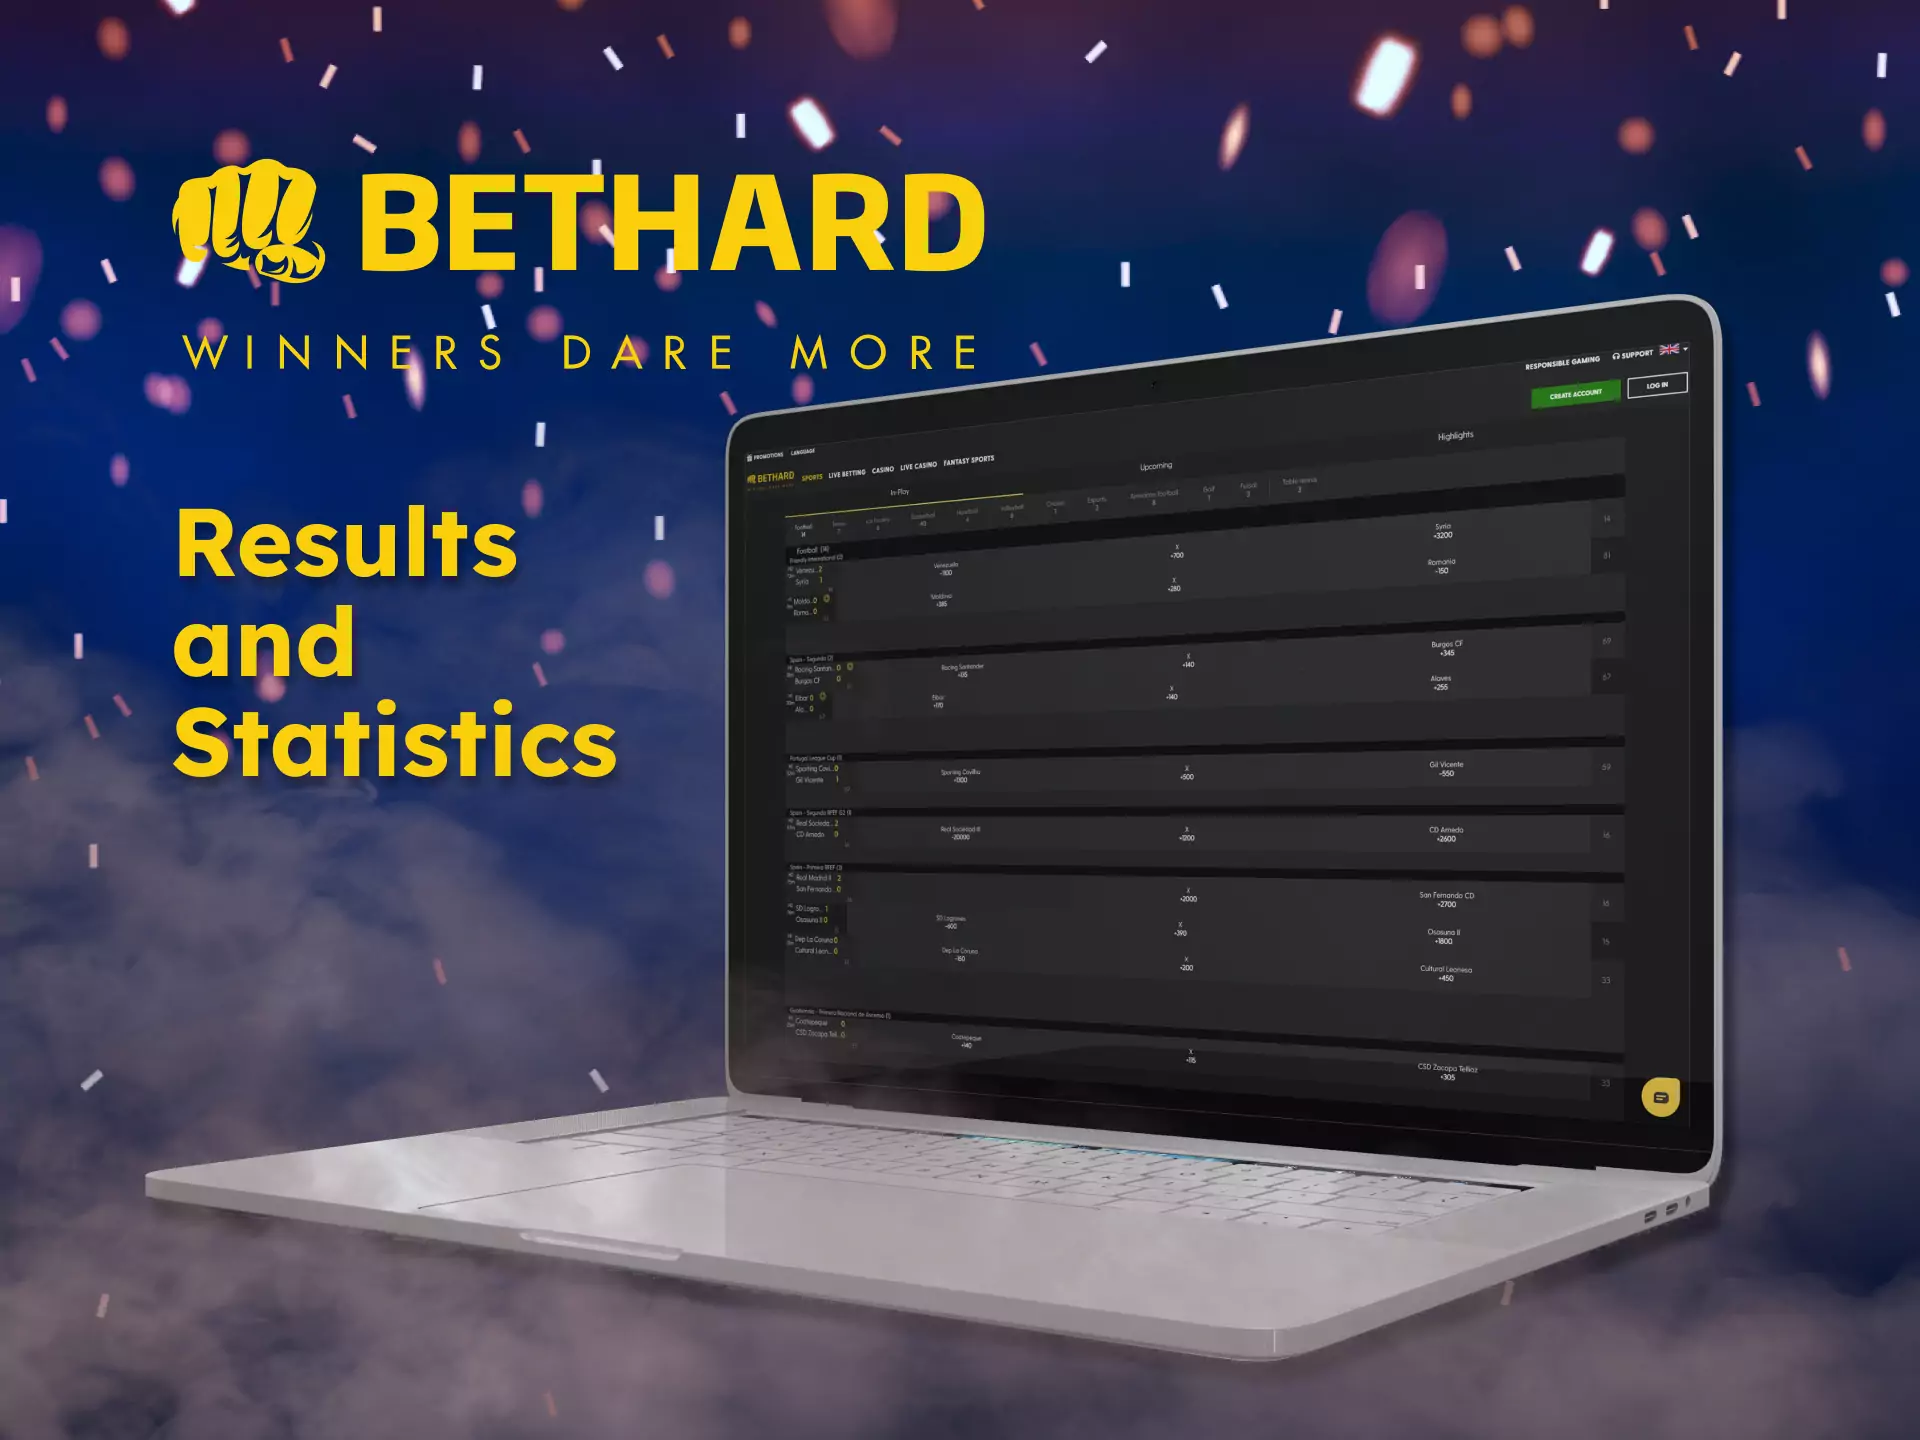 Find out the results and statistics to build your tactics for Bethard.